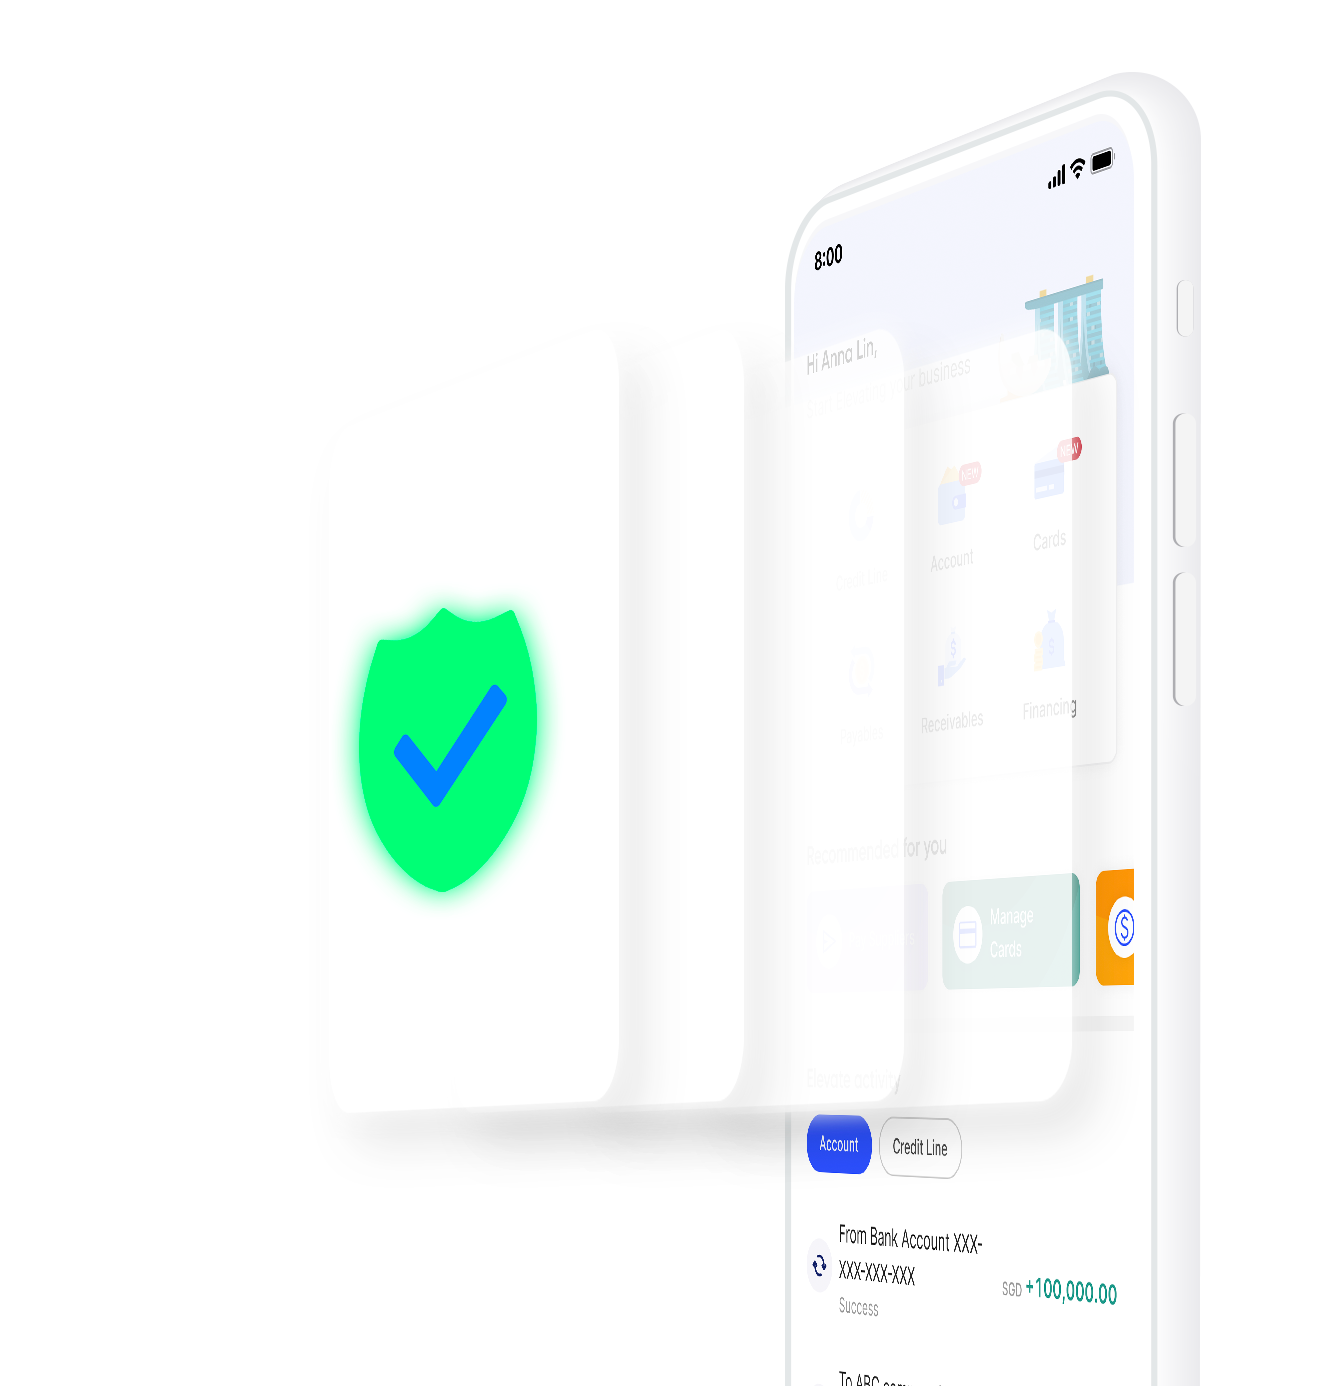 Your account is safeguarded according to the highest security standards | Elevate App